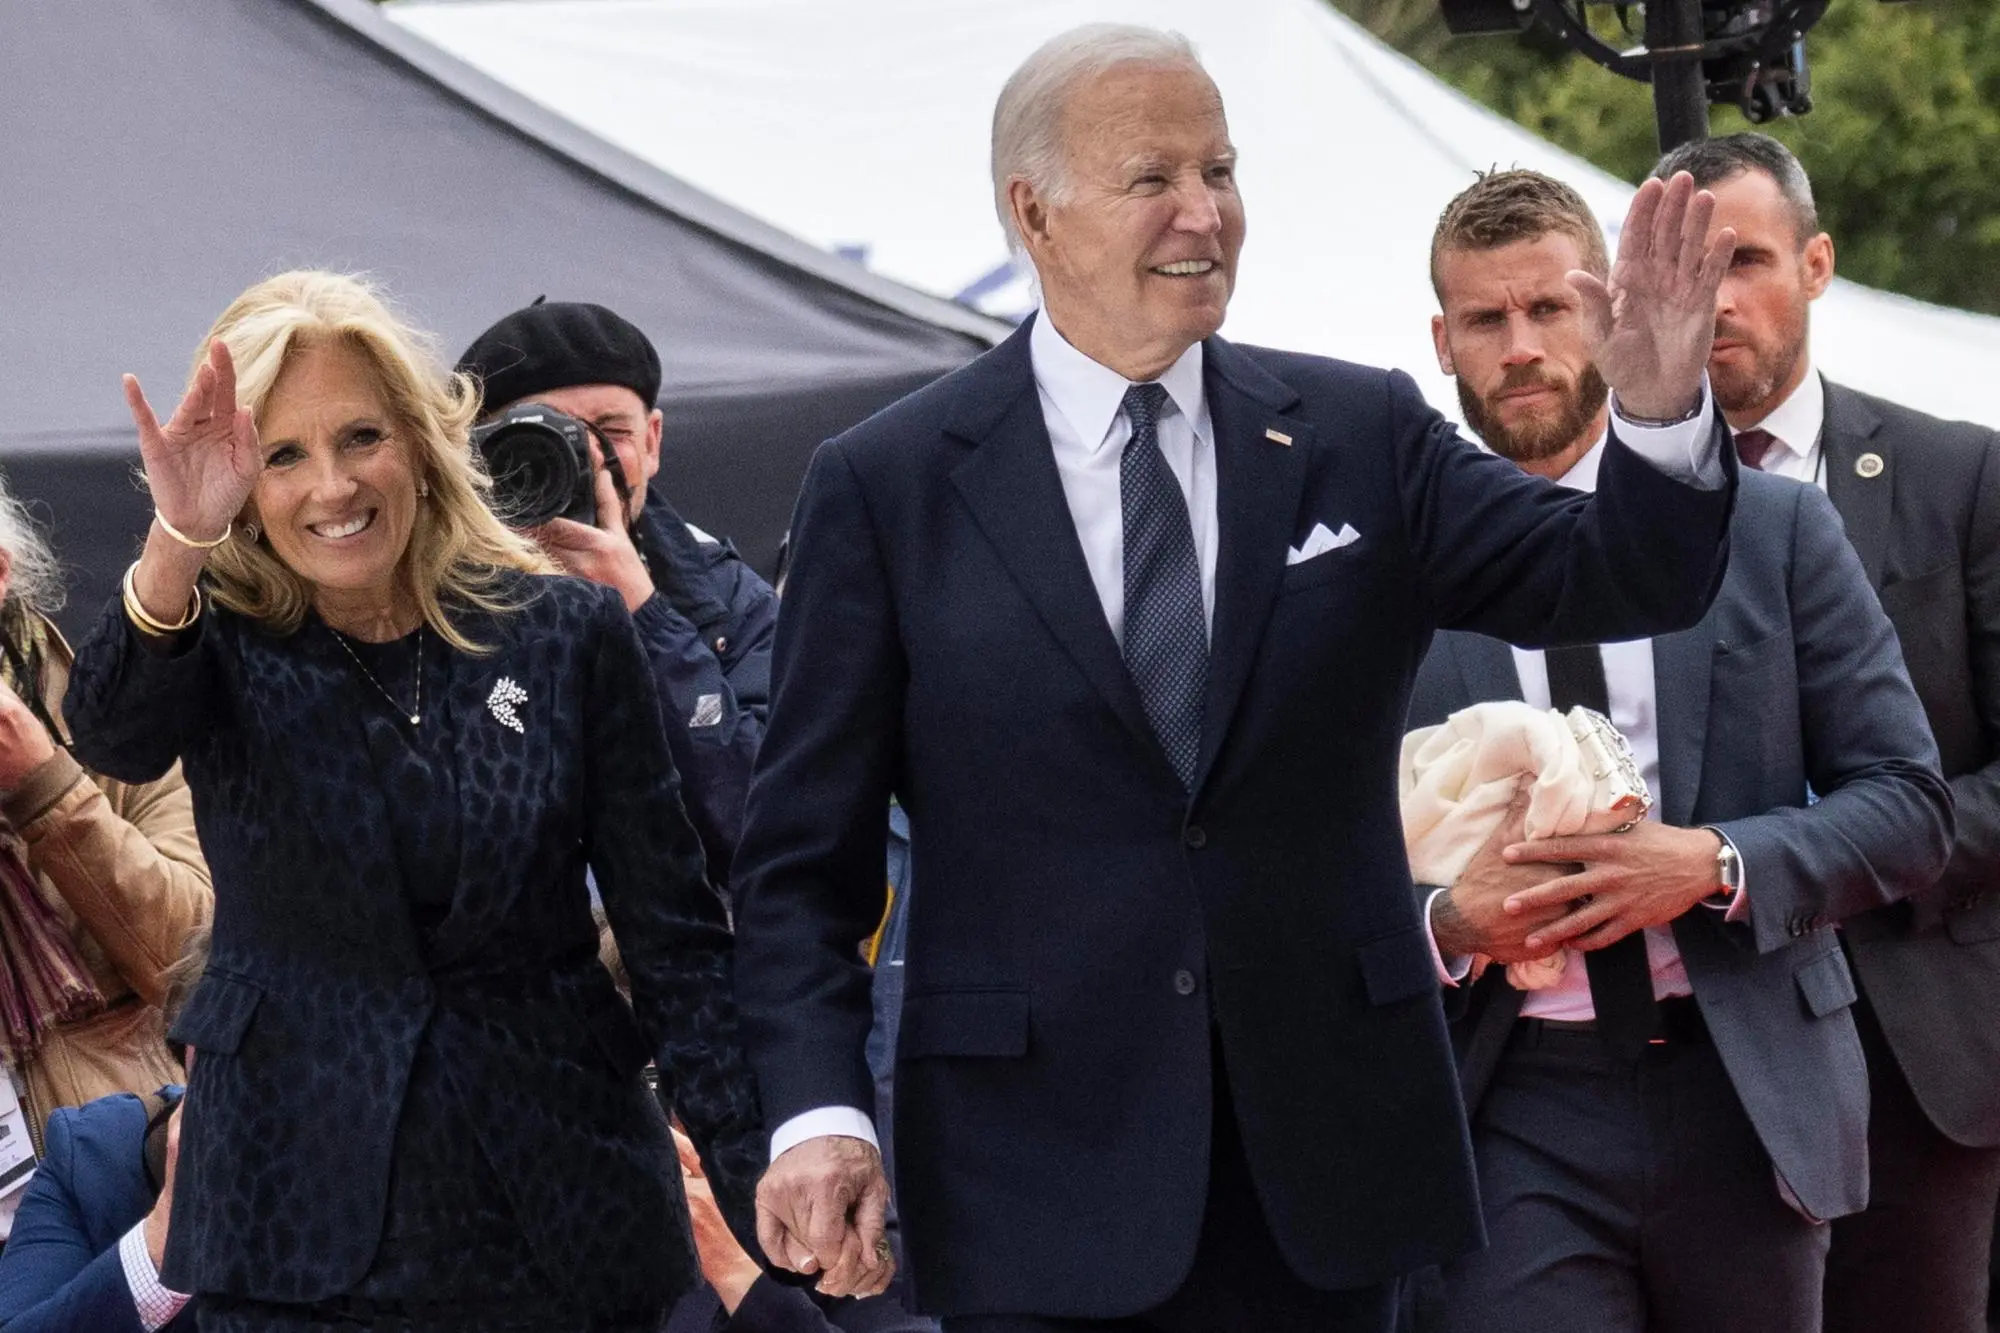 epa11393993 US President Joe Biden (R) and his wife Jill Biden greet the audience as they arrive to attend the commemorative ceremony with dozens of heads of States and more than 200 veterans for the 80th anniversary of D-Day landings in Normandy at Omaha Beach, Saint-Laurent-sur-Mer, France, 06 June 2024. More than 160,000 Western allied troops landed on beaches in Normandy on 06 June 1944 launching the liberation of Western Europe from Nazi occupation during World War II. EPA/ANDRE PAIN